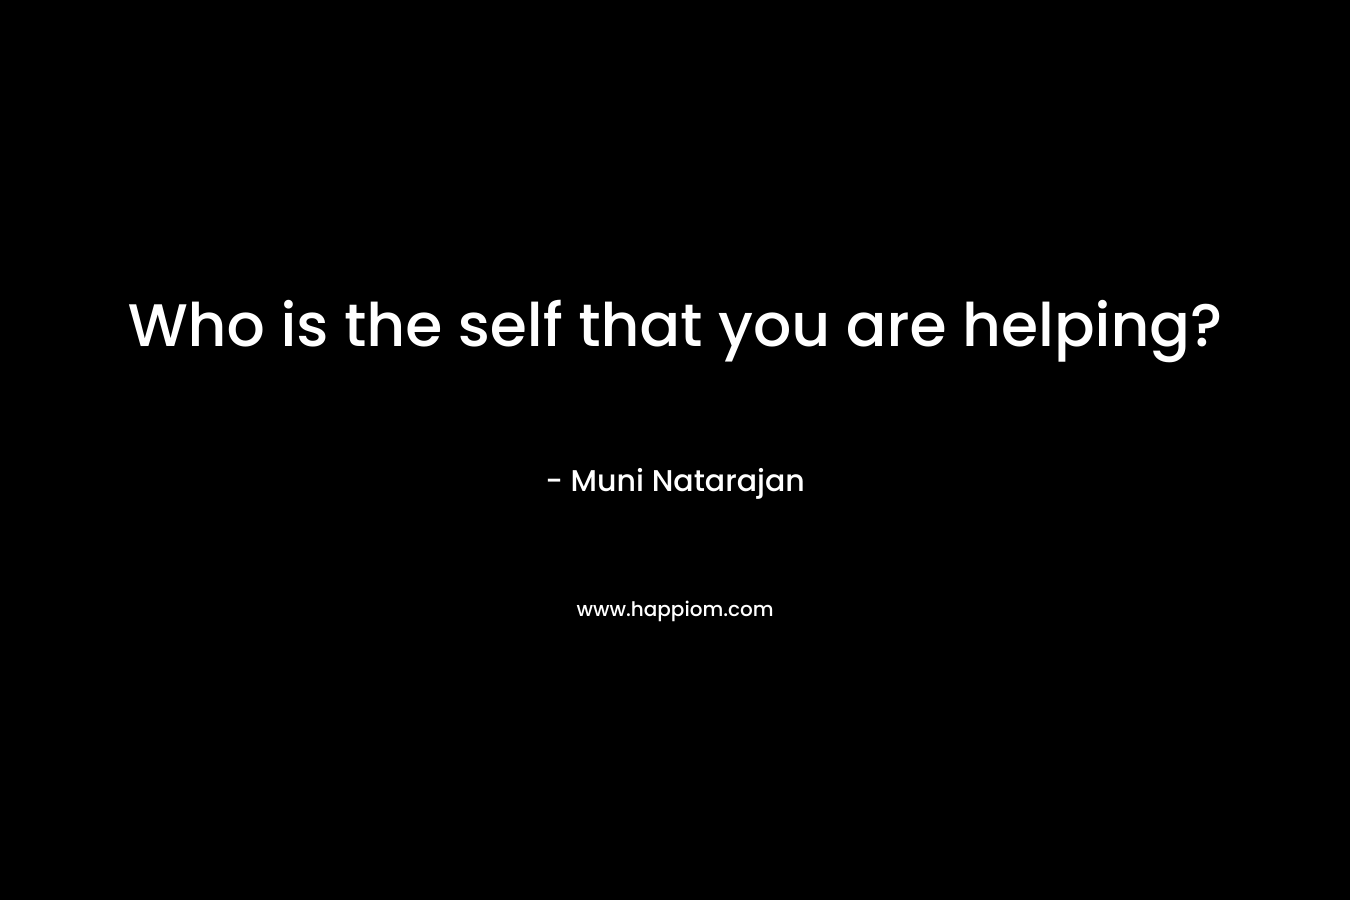 Who is the self that you are helping?